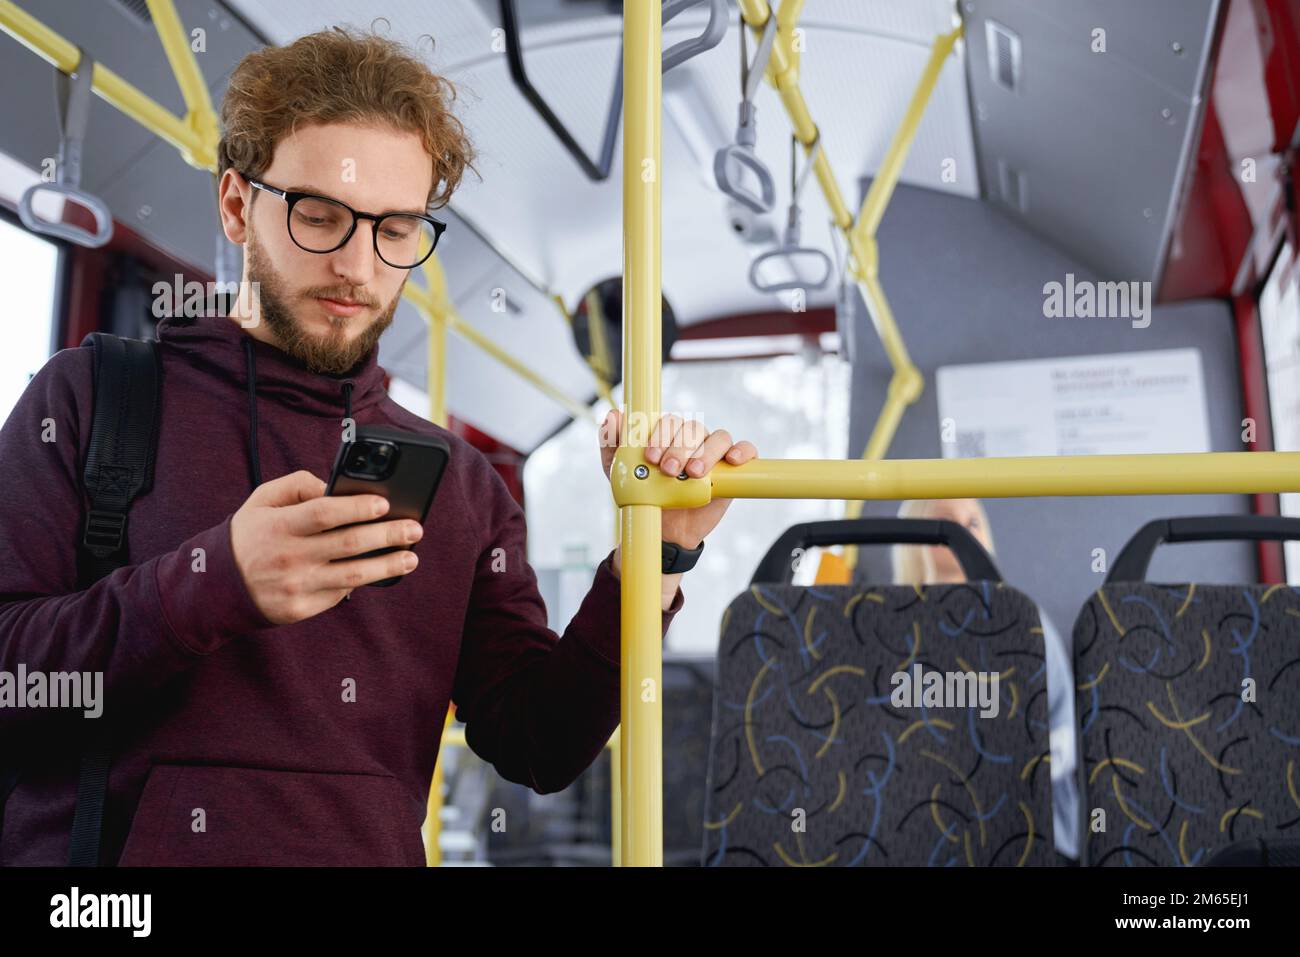 Portrait of serious man standing in bus and staring at smartphone concentrated on some issues. Hurry and rush everywhere at work home and public trans Stock Photo